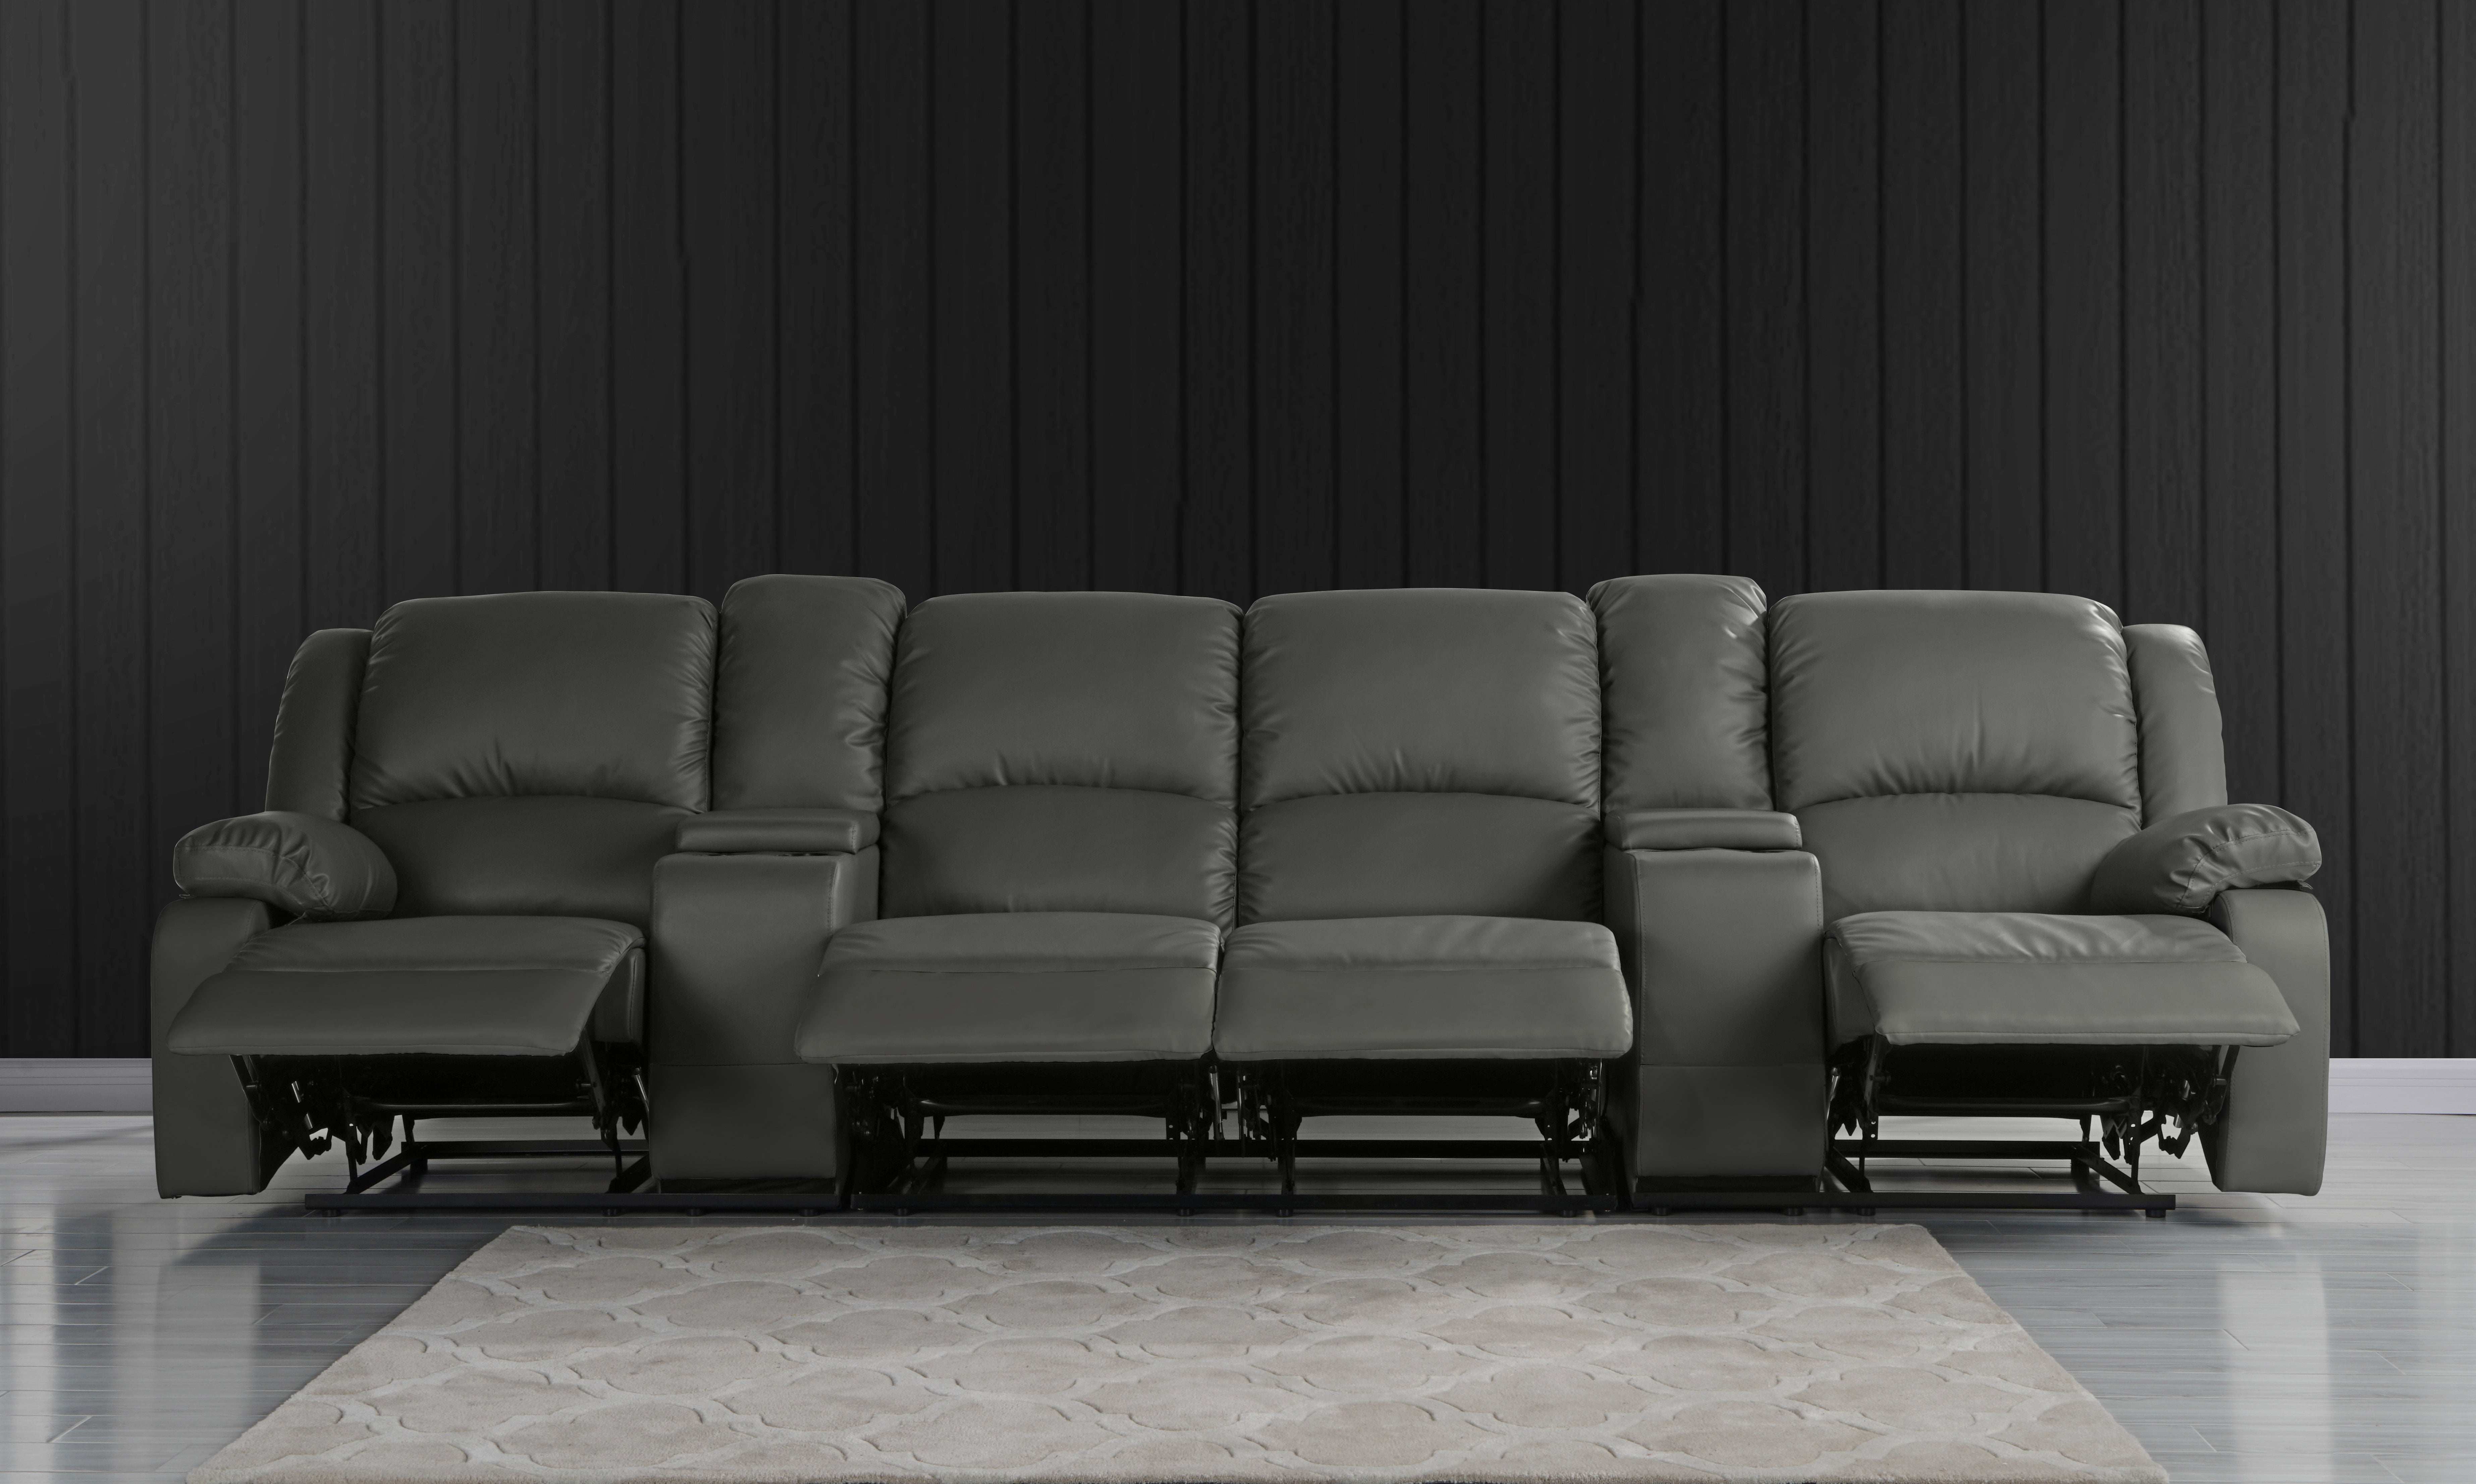 Home Theater 4 Seat Recliner Sofa With, Grey Reclining Sofa With Cup Holders